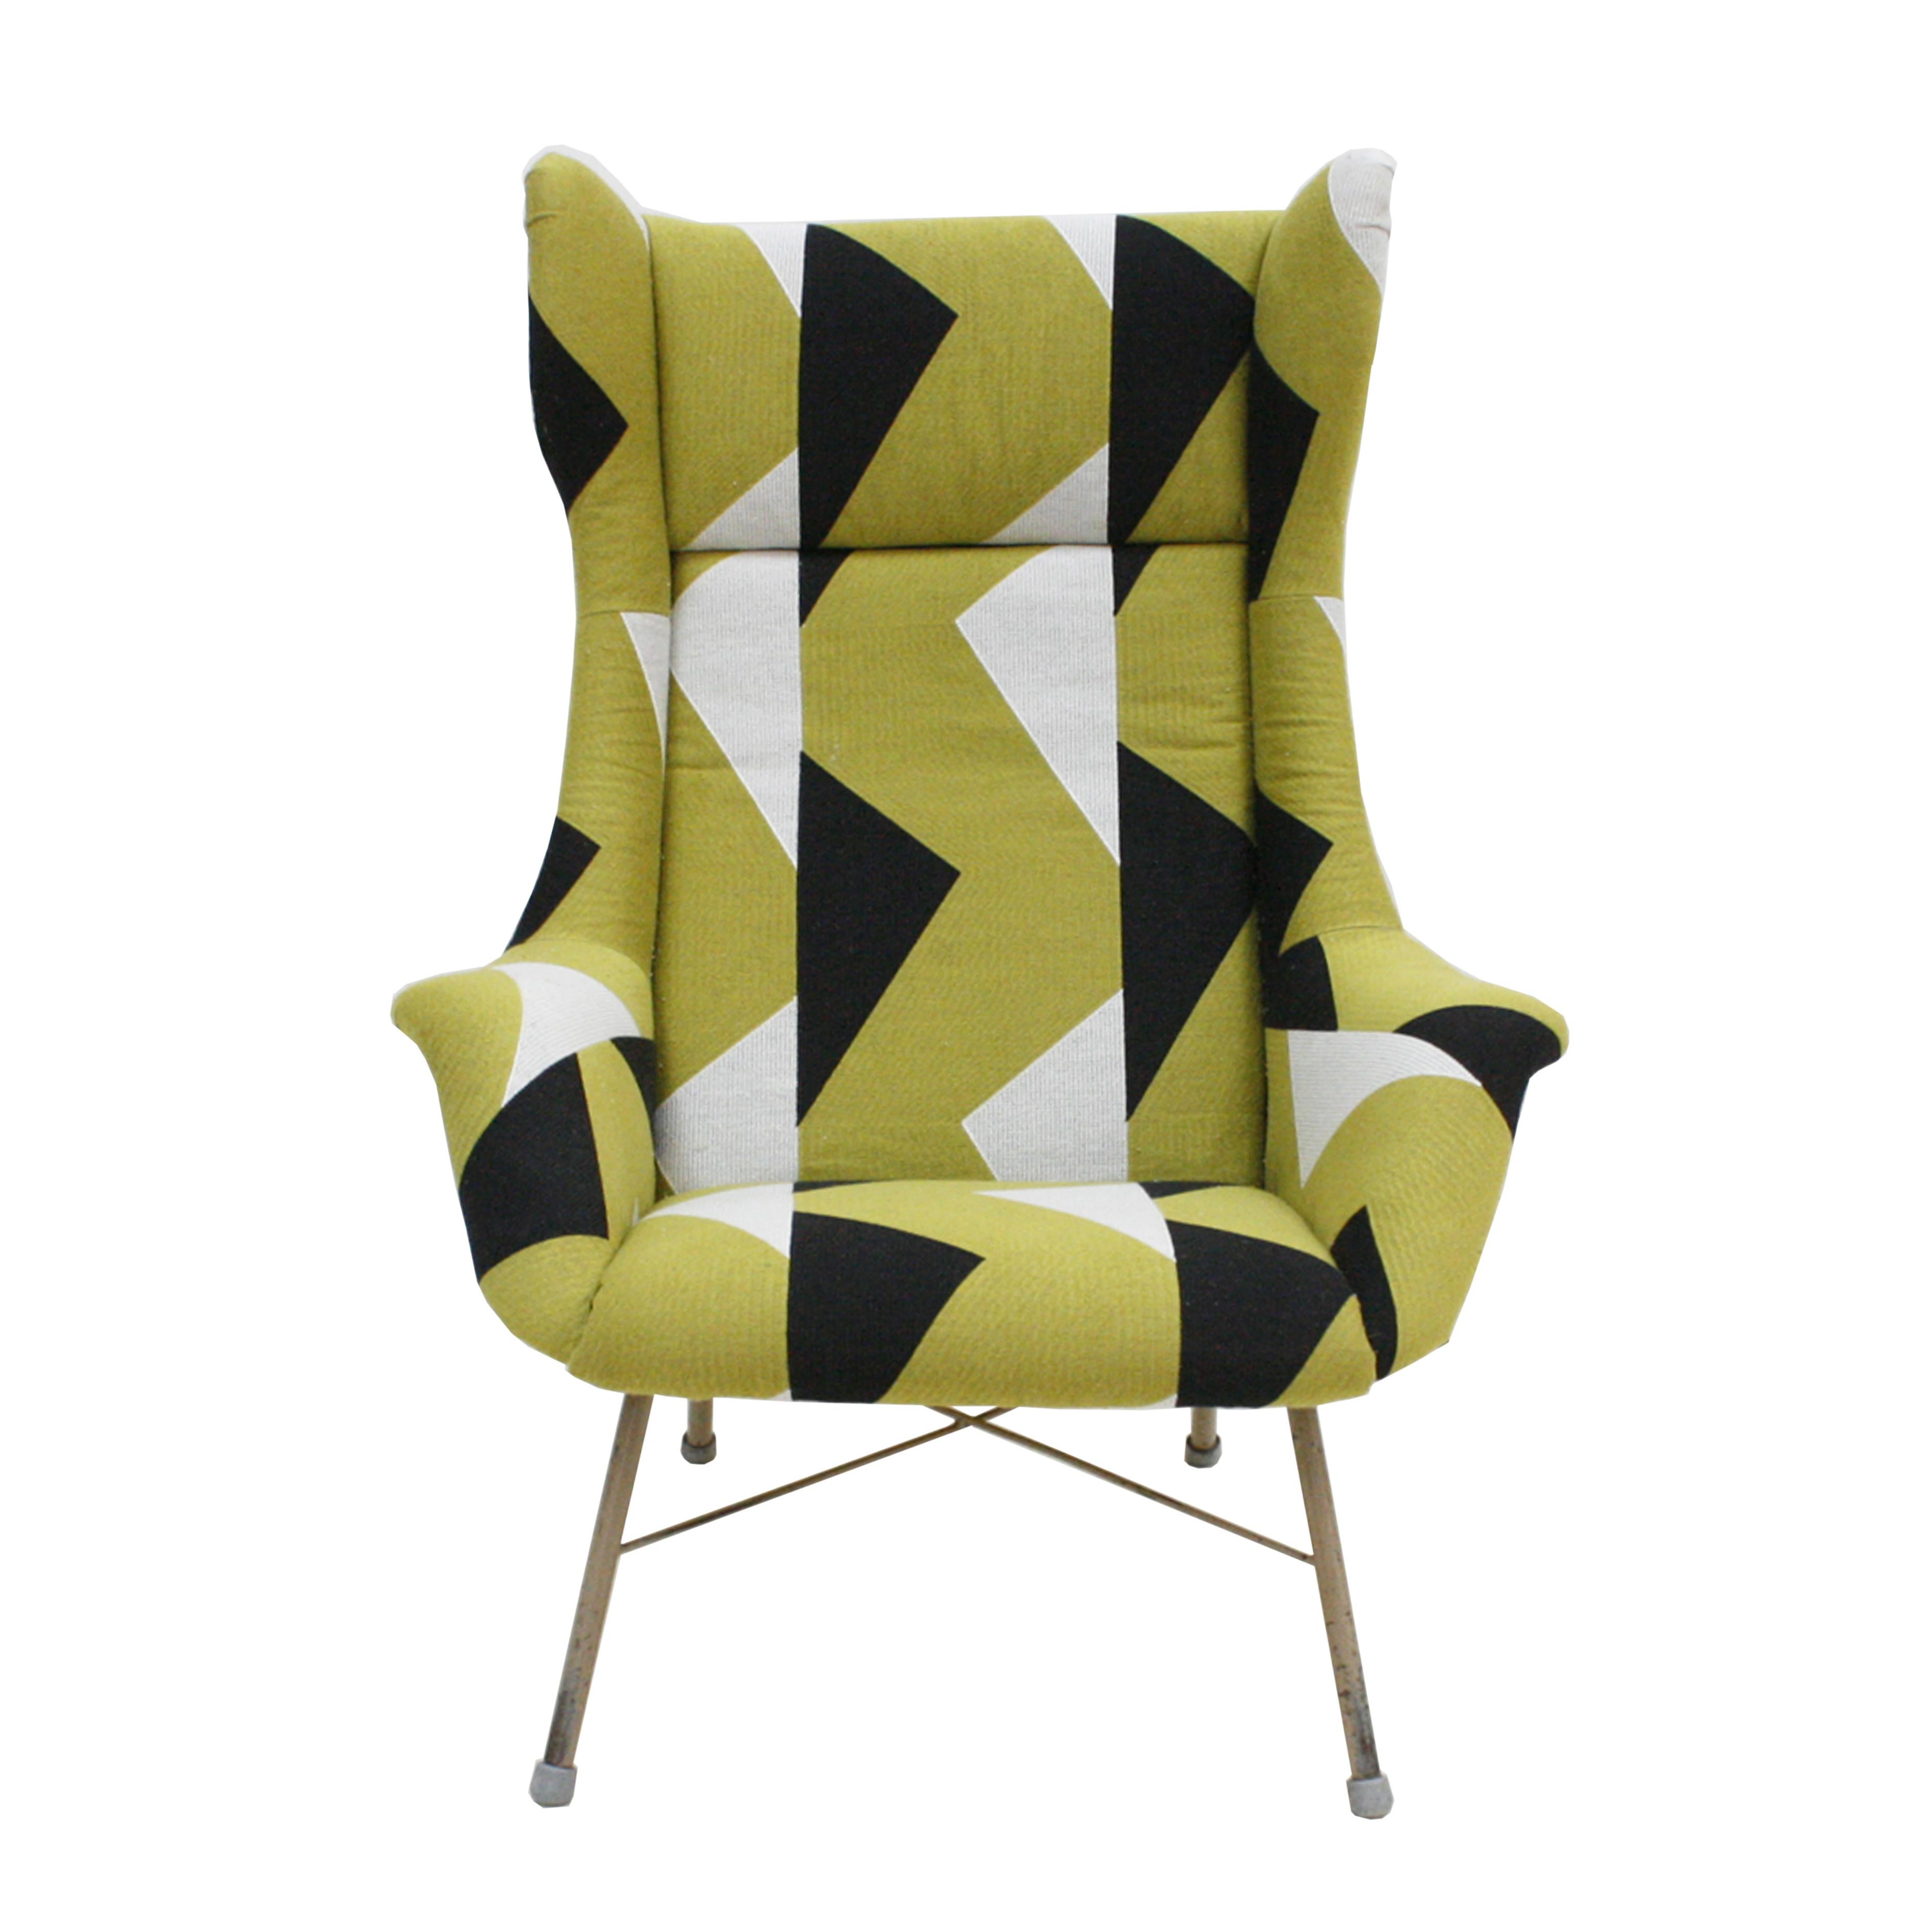 Mid-Century Modern armchair designed by Miroslav Navratil in the 1960s. The armchair is composed of a solid wood shell upholstered with a geometric motif wool fabric in green, white, and black, supported by a white lacquered metal structure.